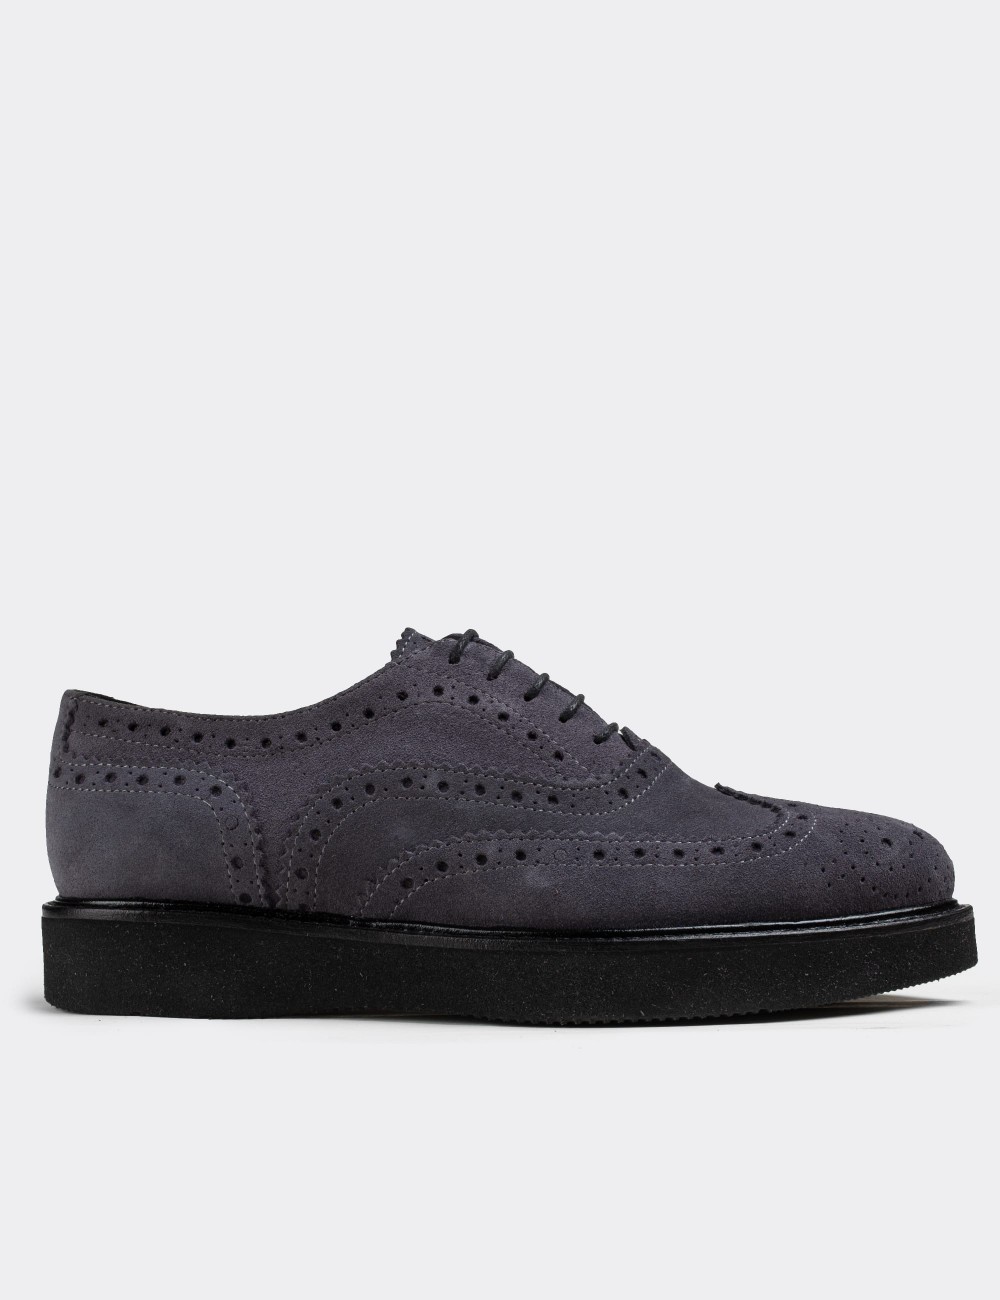 Gray Suede Leather Lace-up Shoes - 01418ZGRIE01